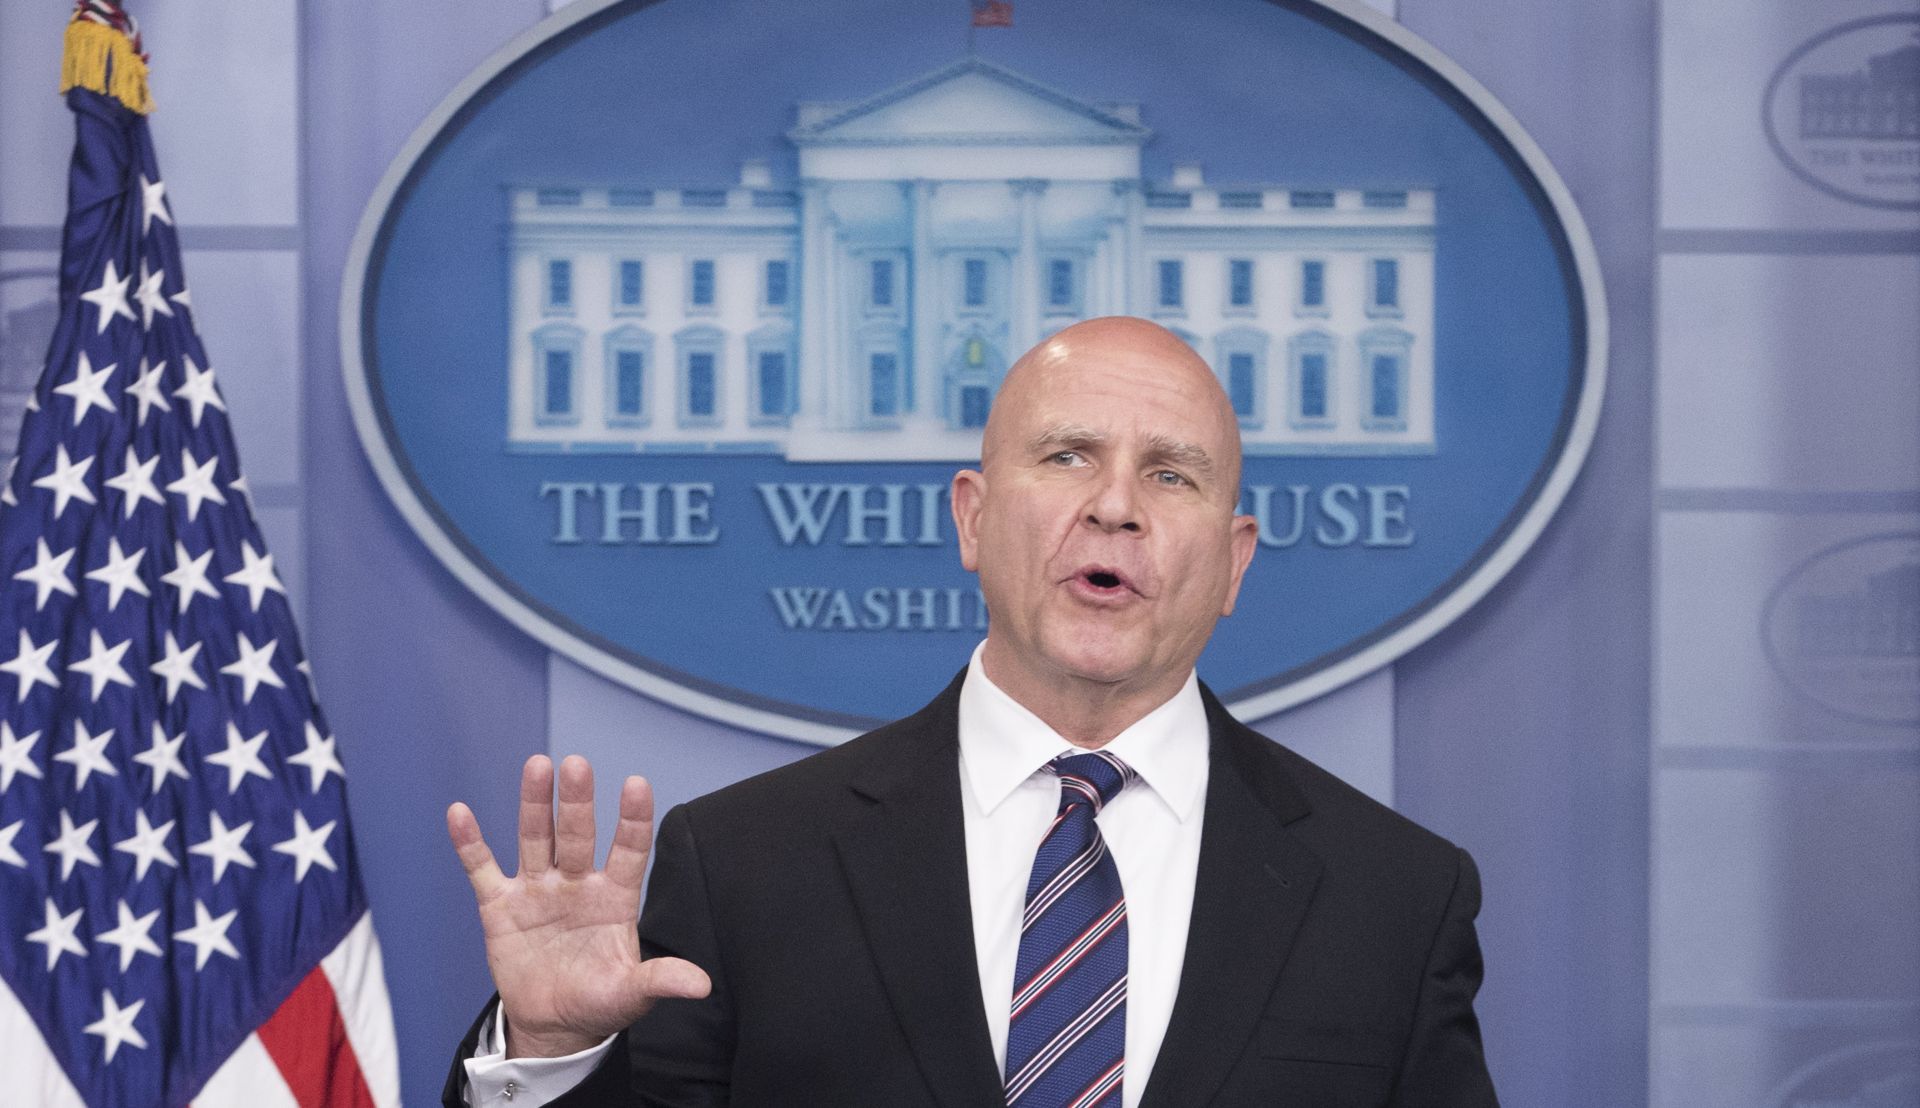 epa05968024 National Security Advisor H.R. McMaster responds to a question from the news media during a press conference in the Brady Press Briefing Room, at the White House in Washington, DC, USA, 16 May 2017.  EPA/MICHAEL REYNOLDS